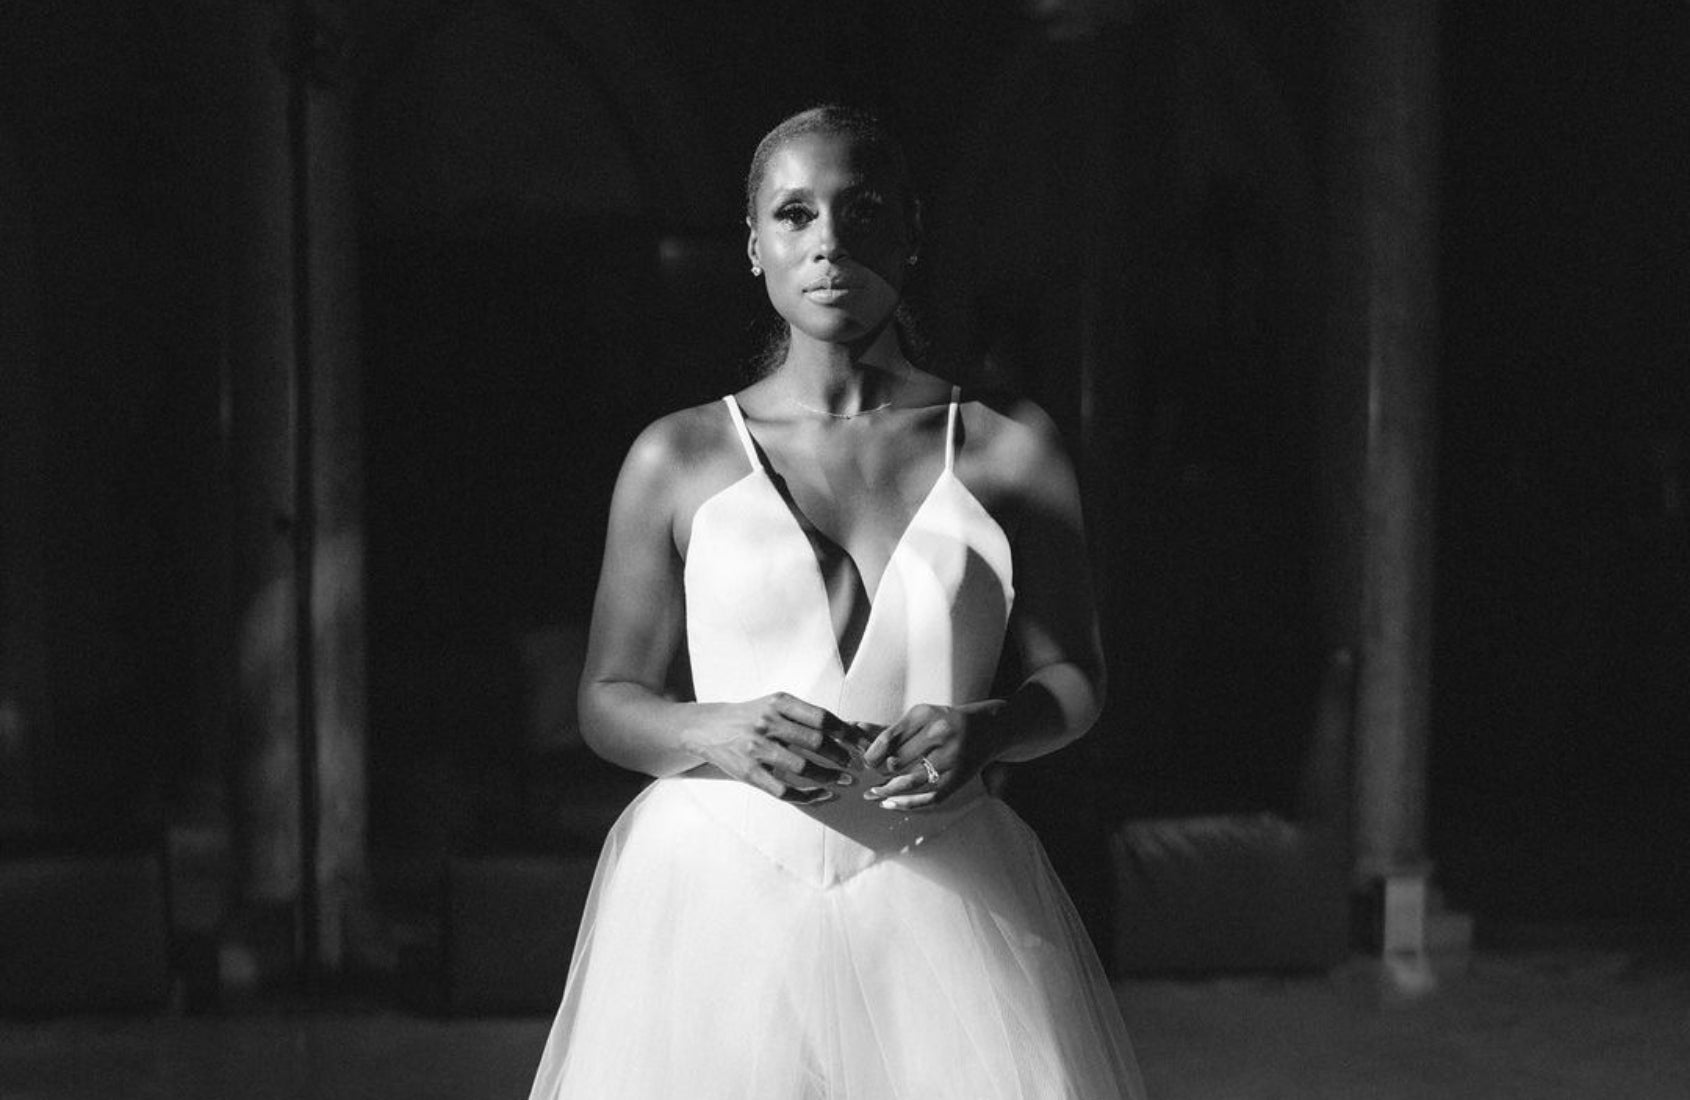 Issa Bride: Issa Rae Marries Longtime Boyfriend Louis Diame In The Southeast Of France And The Photos Are Breathtaking